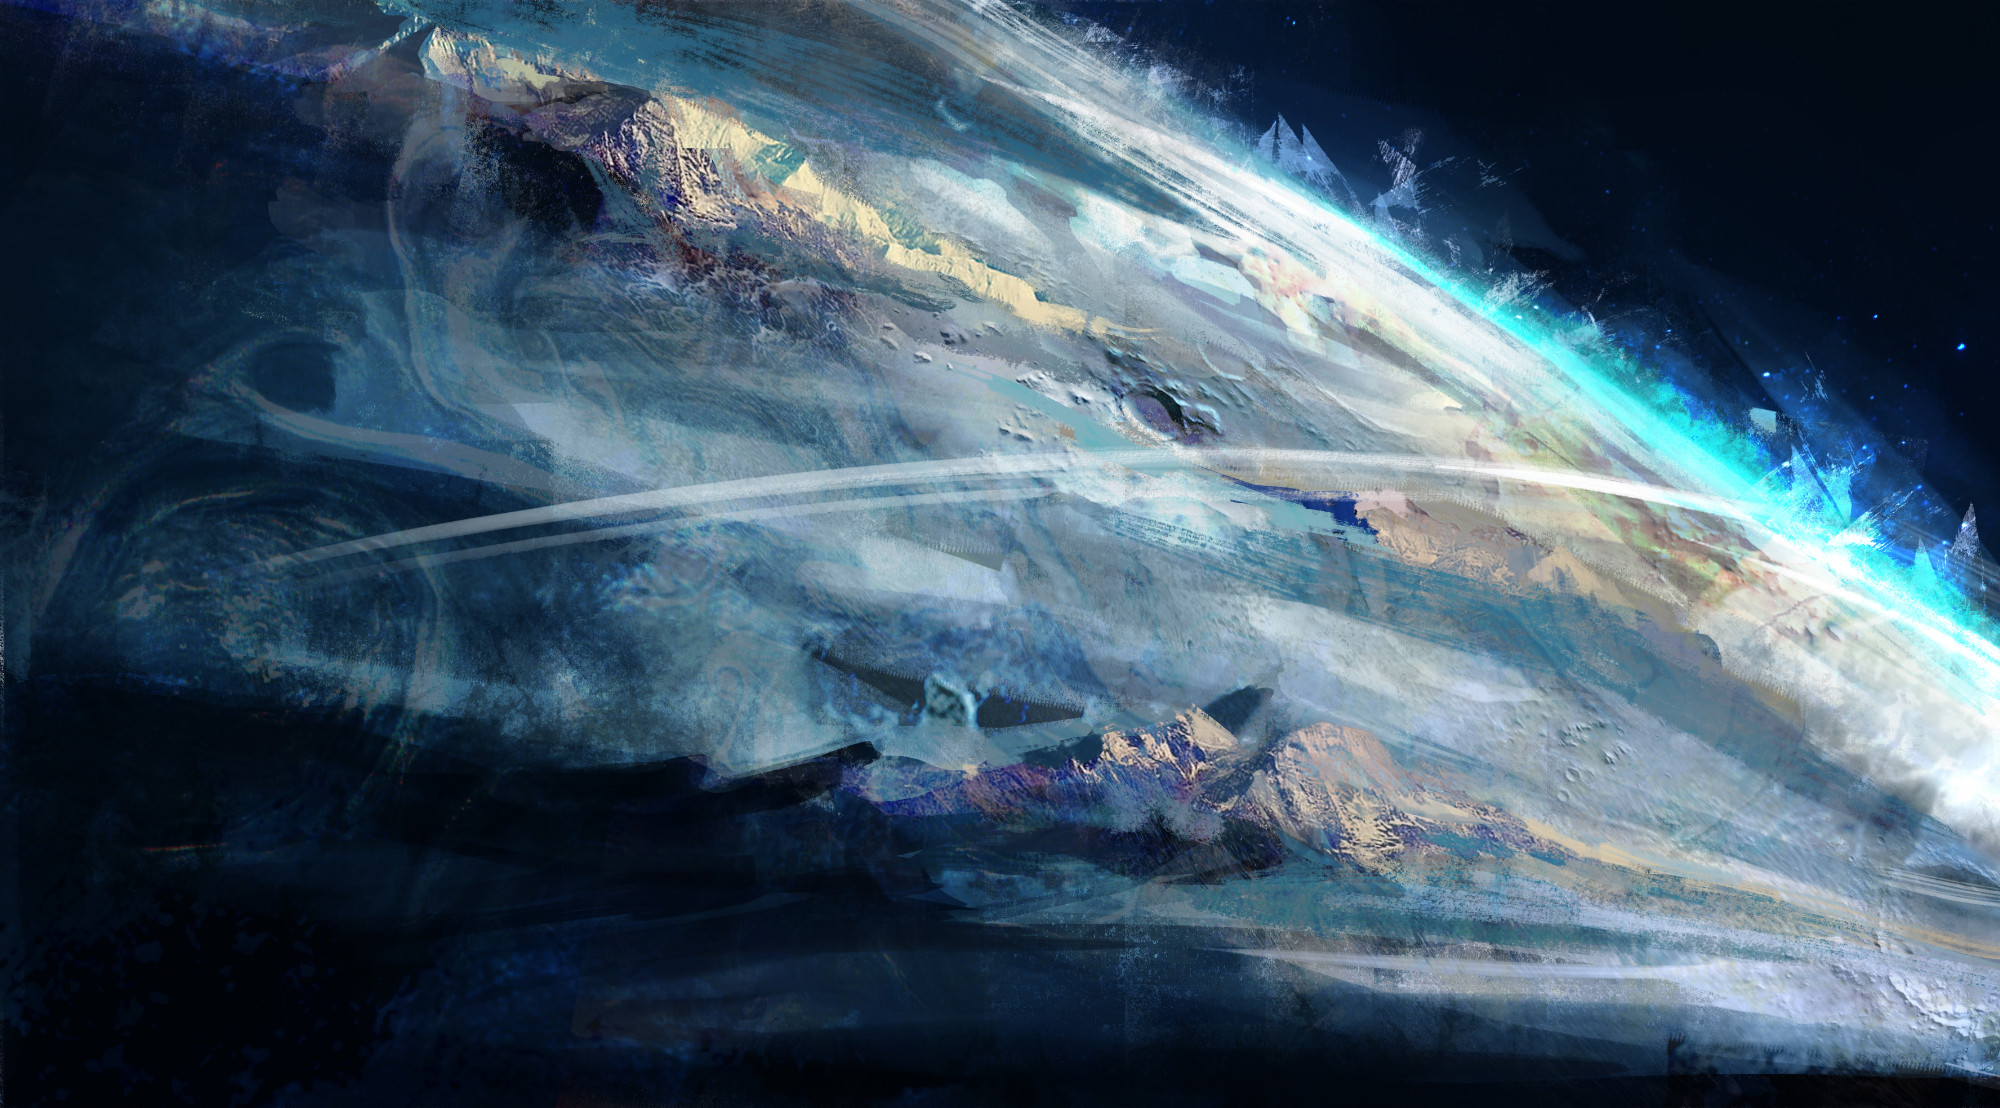 Planet. A selected digital painting taken from a series exploring the ideas of life in space.